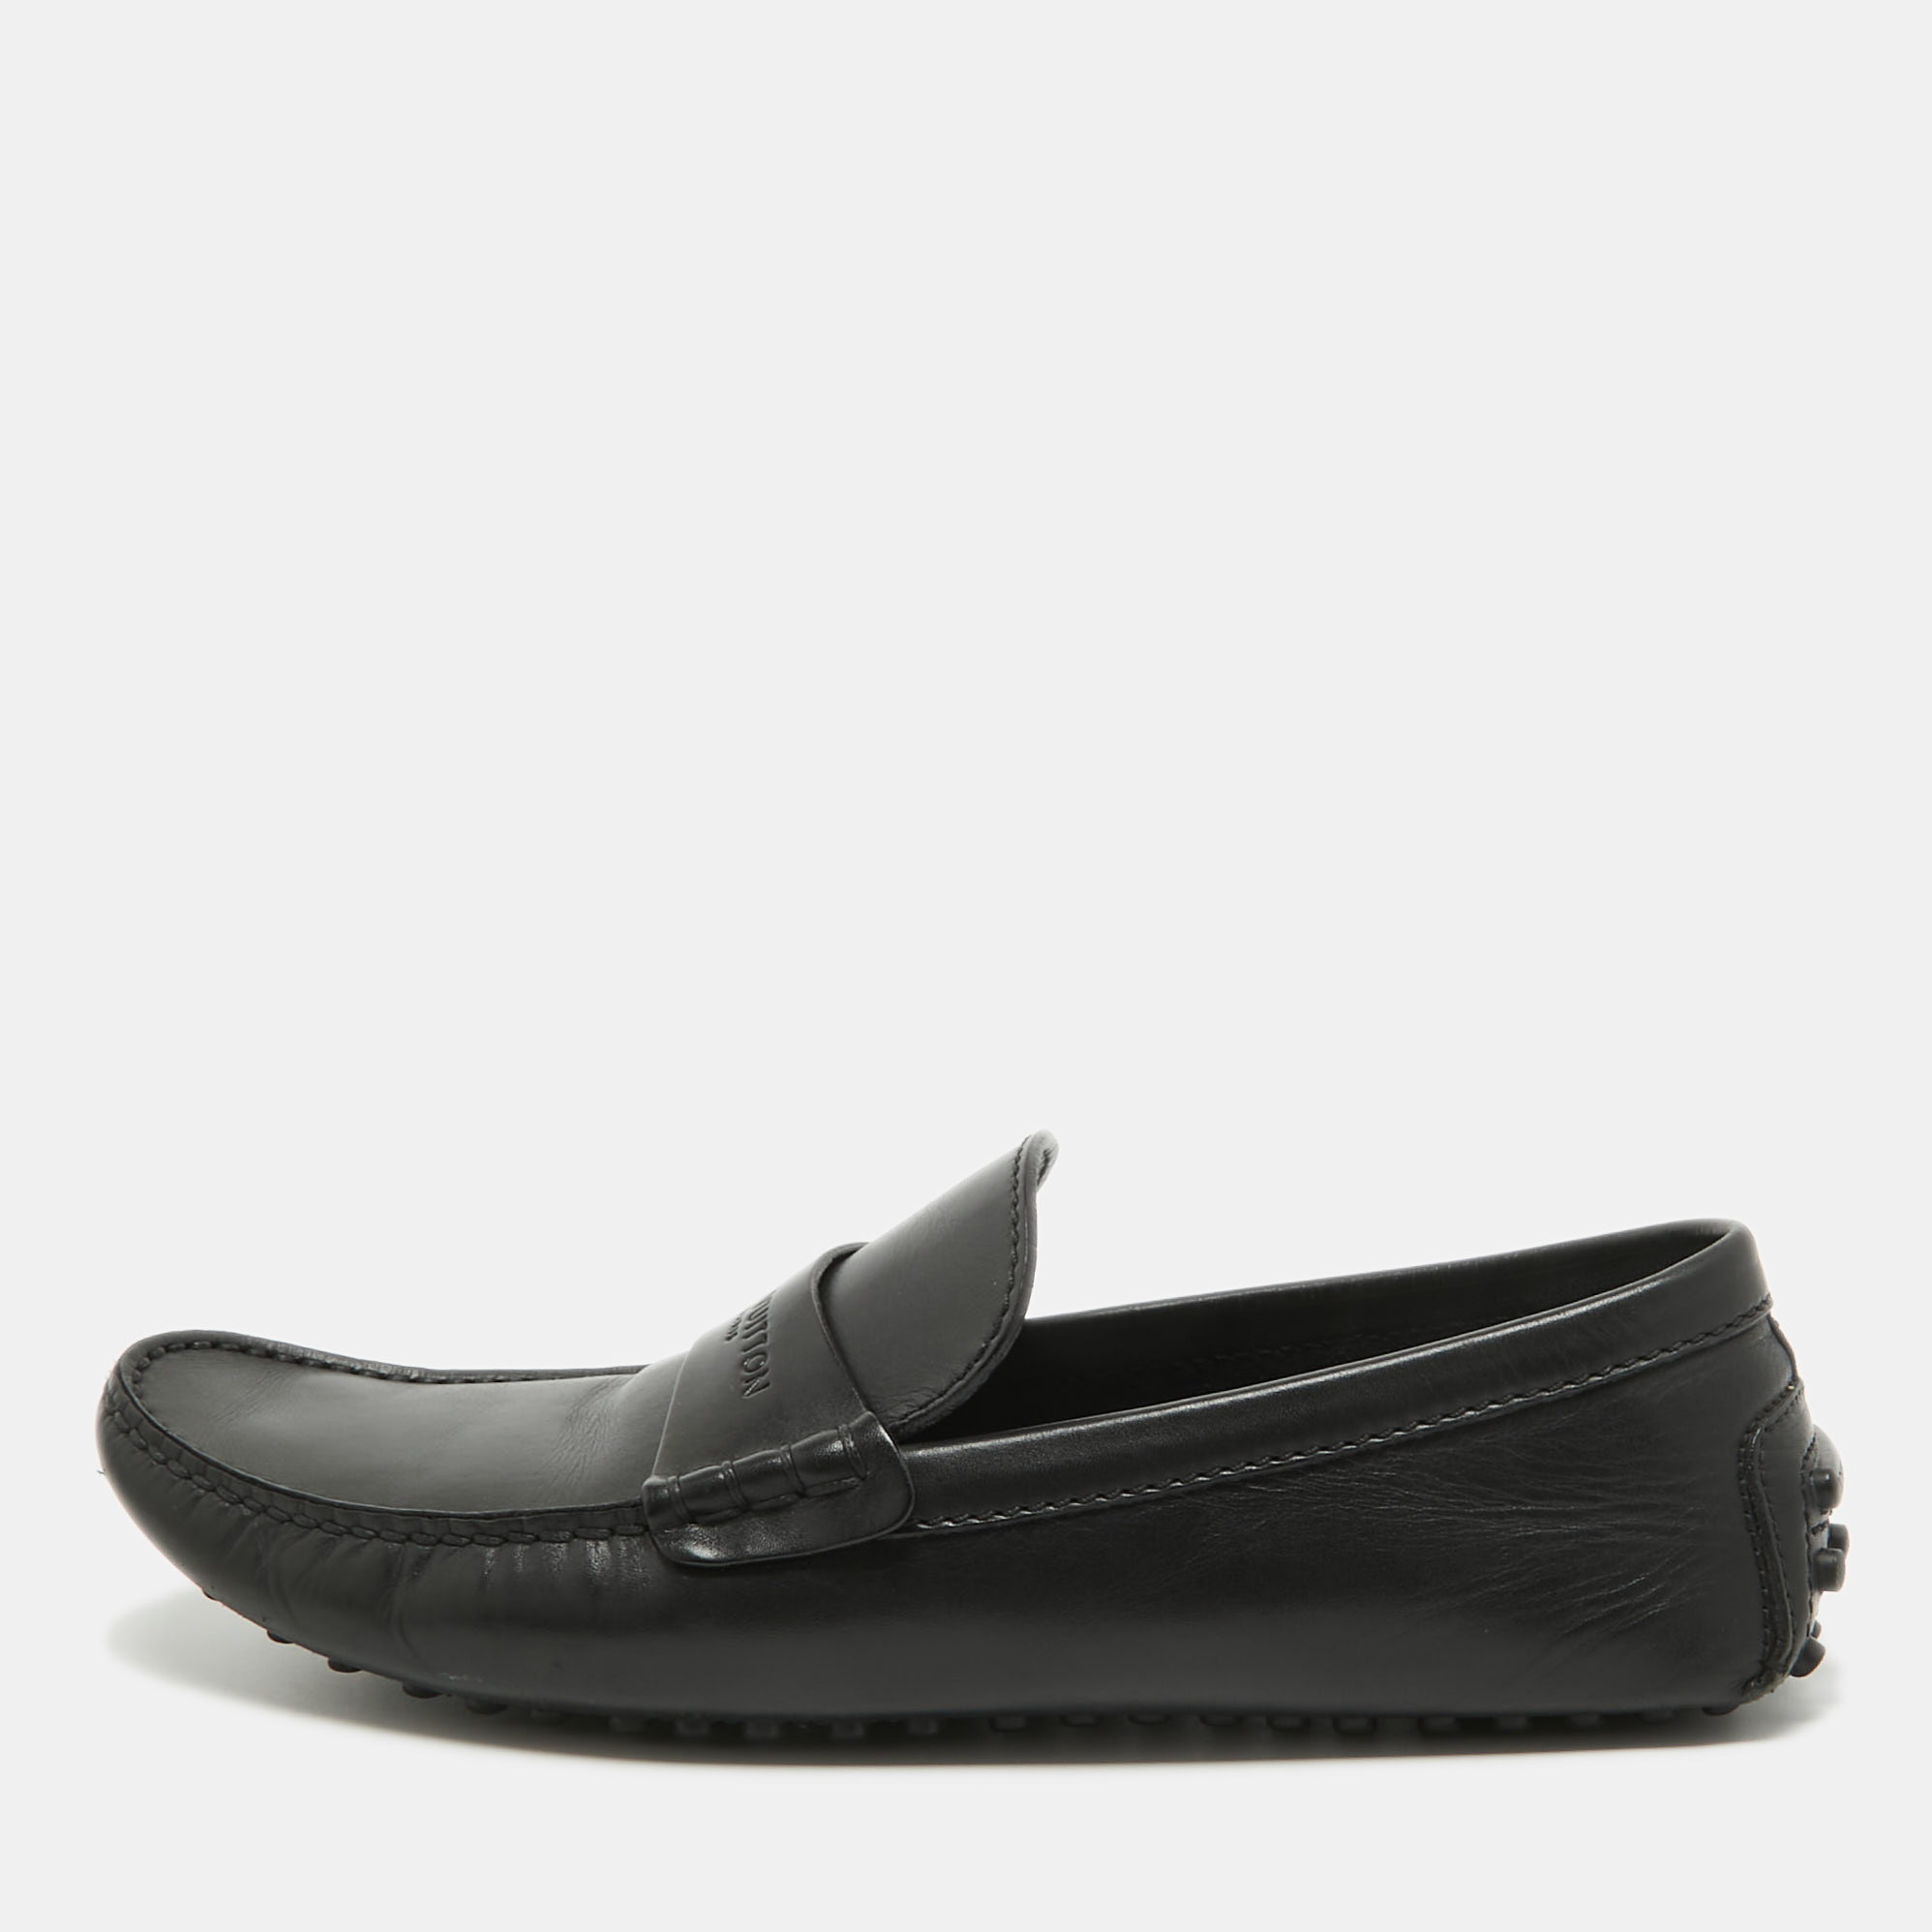 Pre-owned Louis Vuitton Black Leather Slip On Loafers Size 42.5